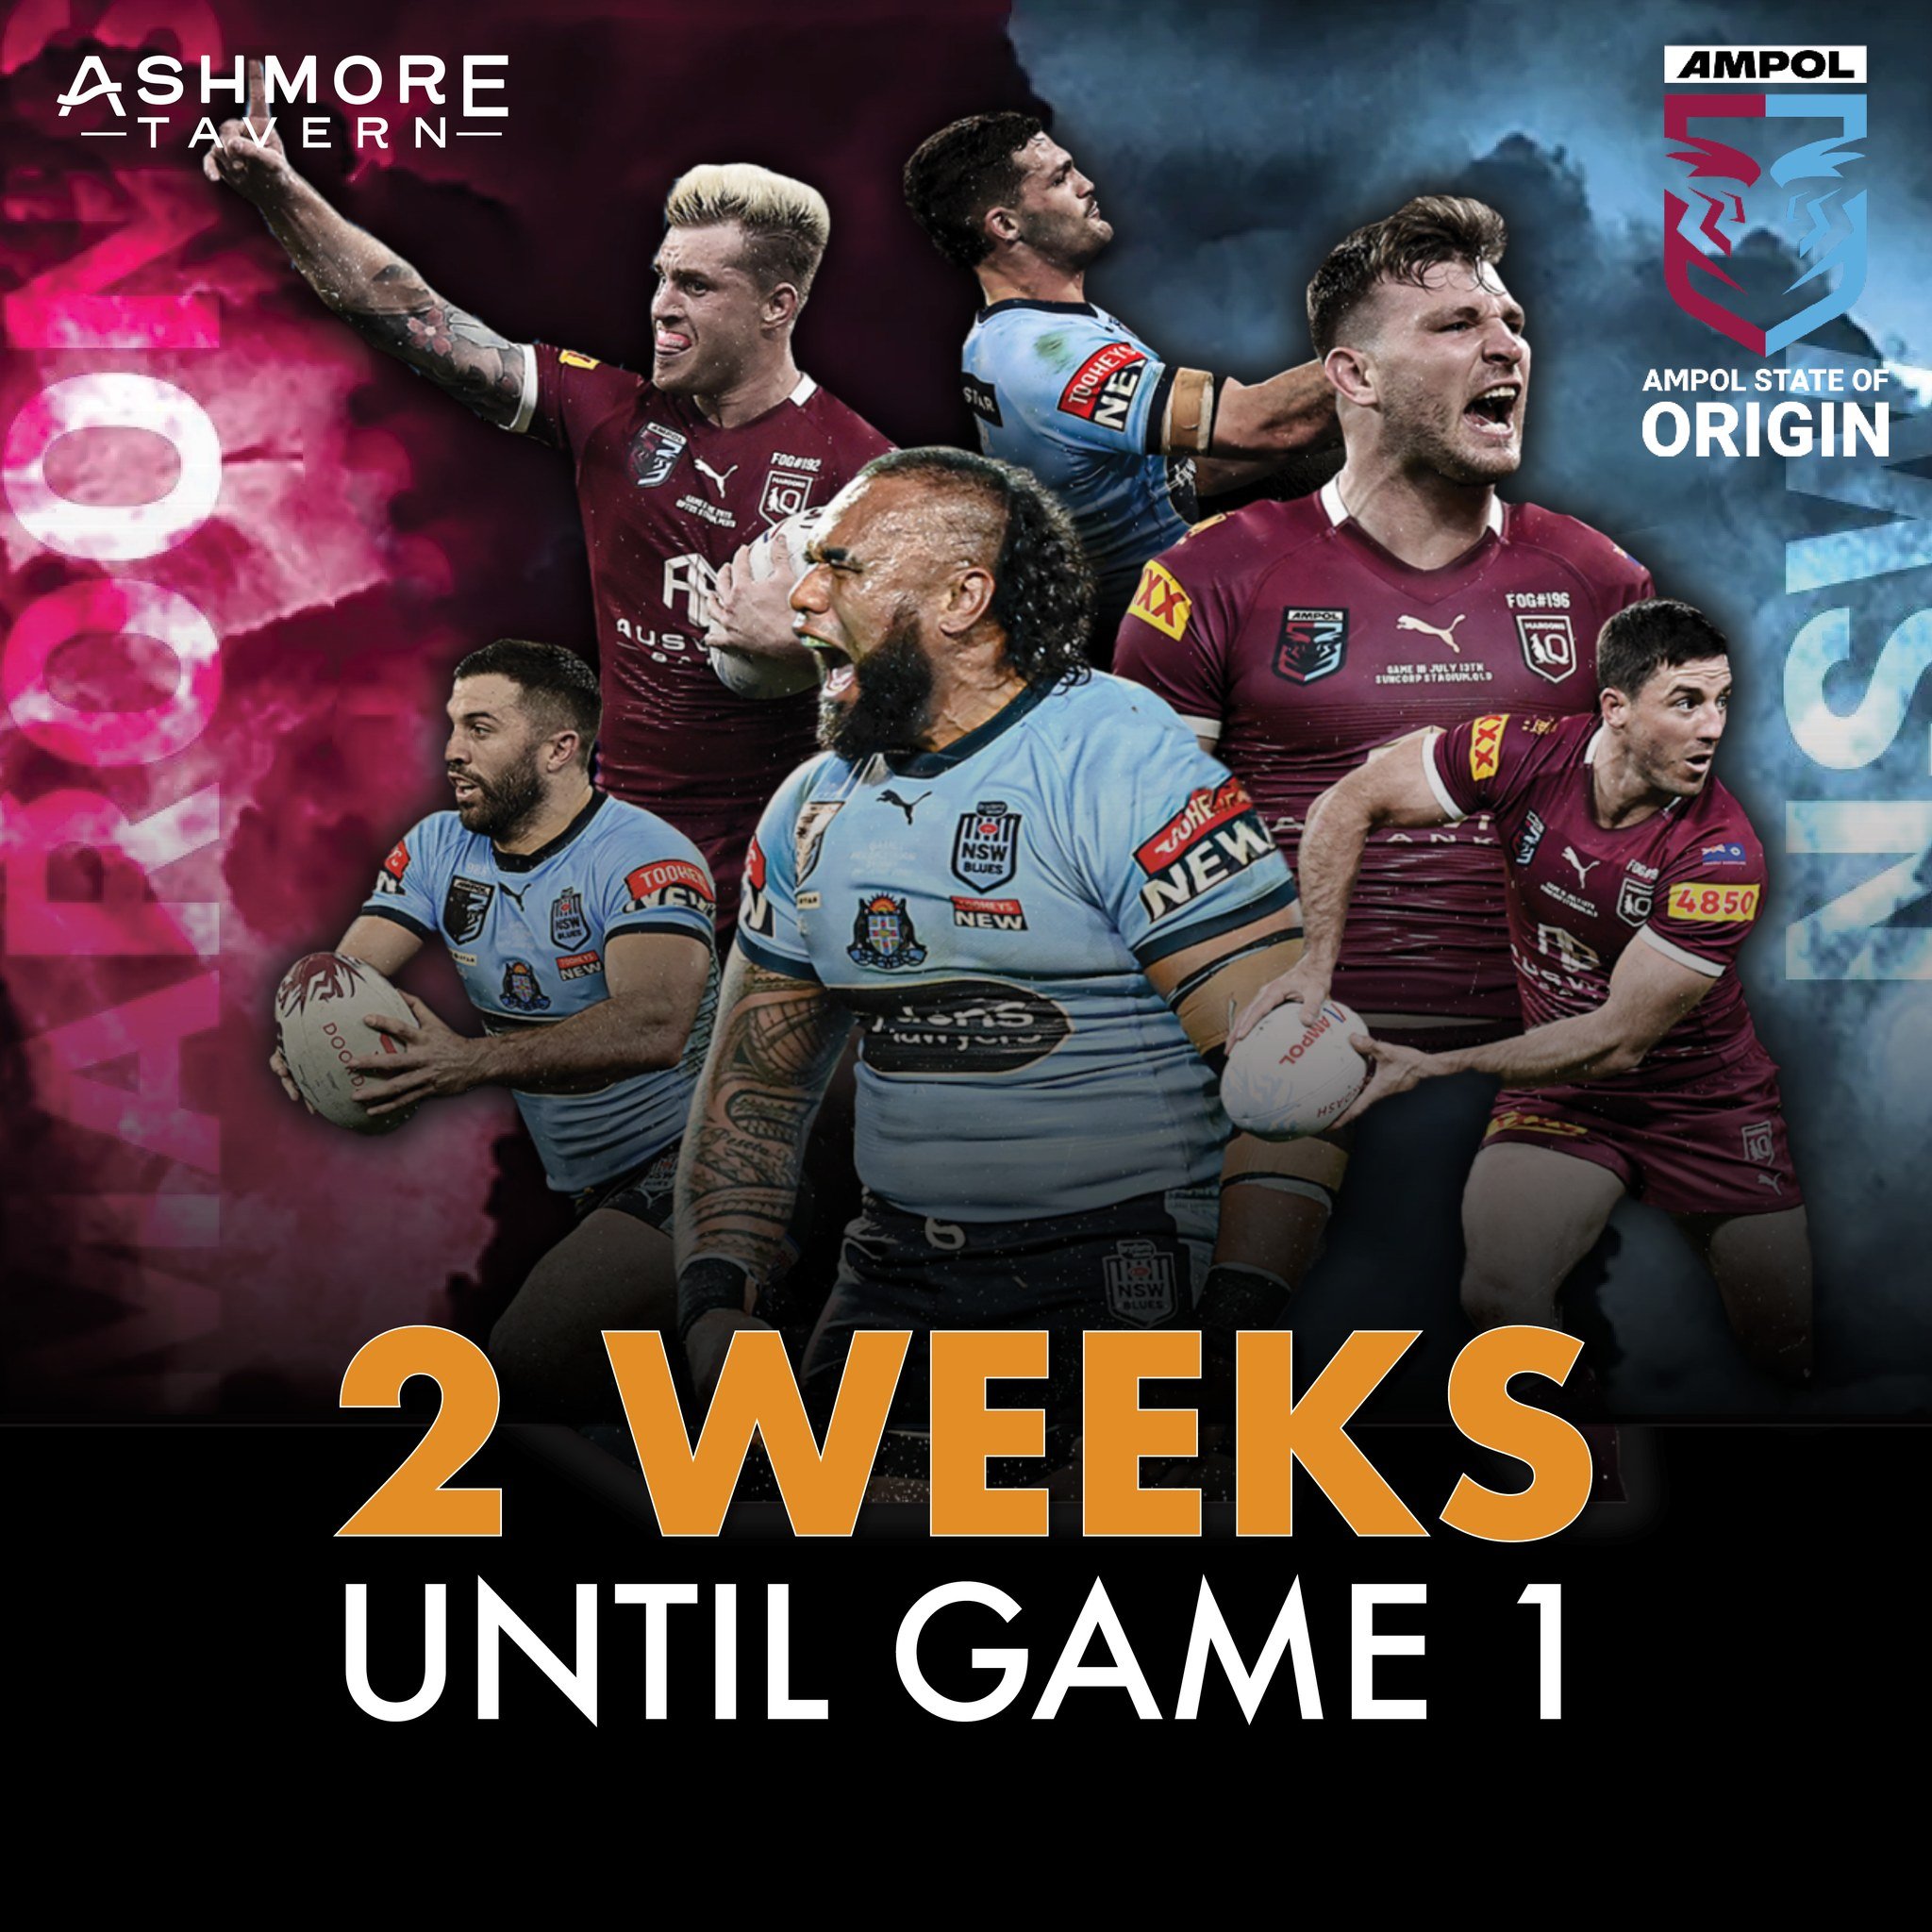 🏉 Only 2 weeks left until the State of Origin kicks off at Ashmore Tavern!

Don&rsquo;t forget, you'll also have the chance to win some great prizes! We're giving away 2 x $50 Ashmore Tavern Vouchers to spend on Game night 2!

Enjoy some delicious f